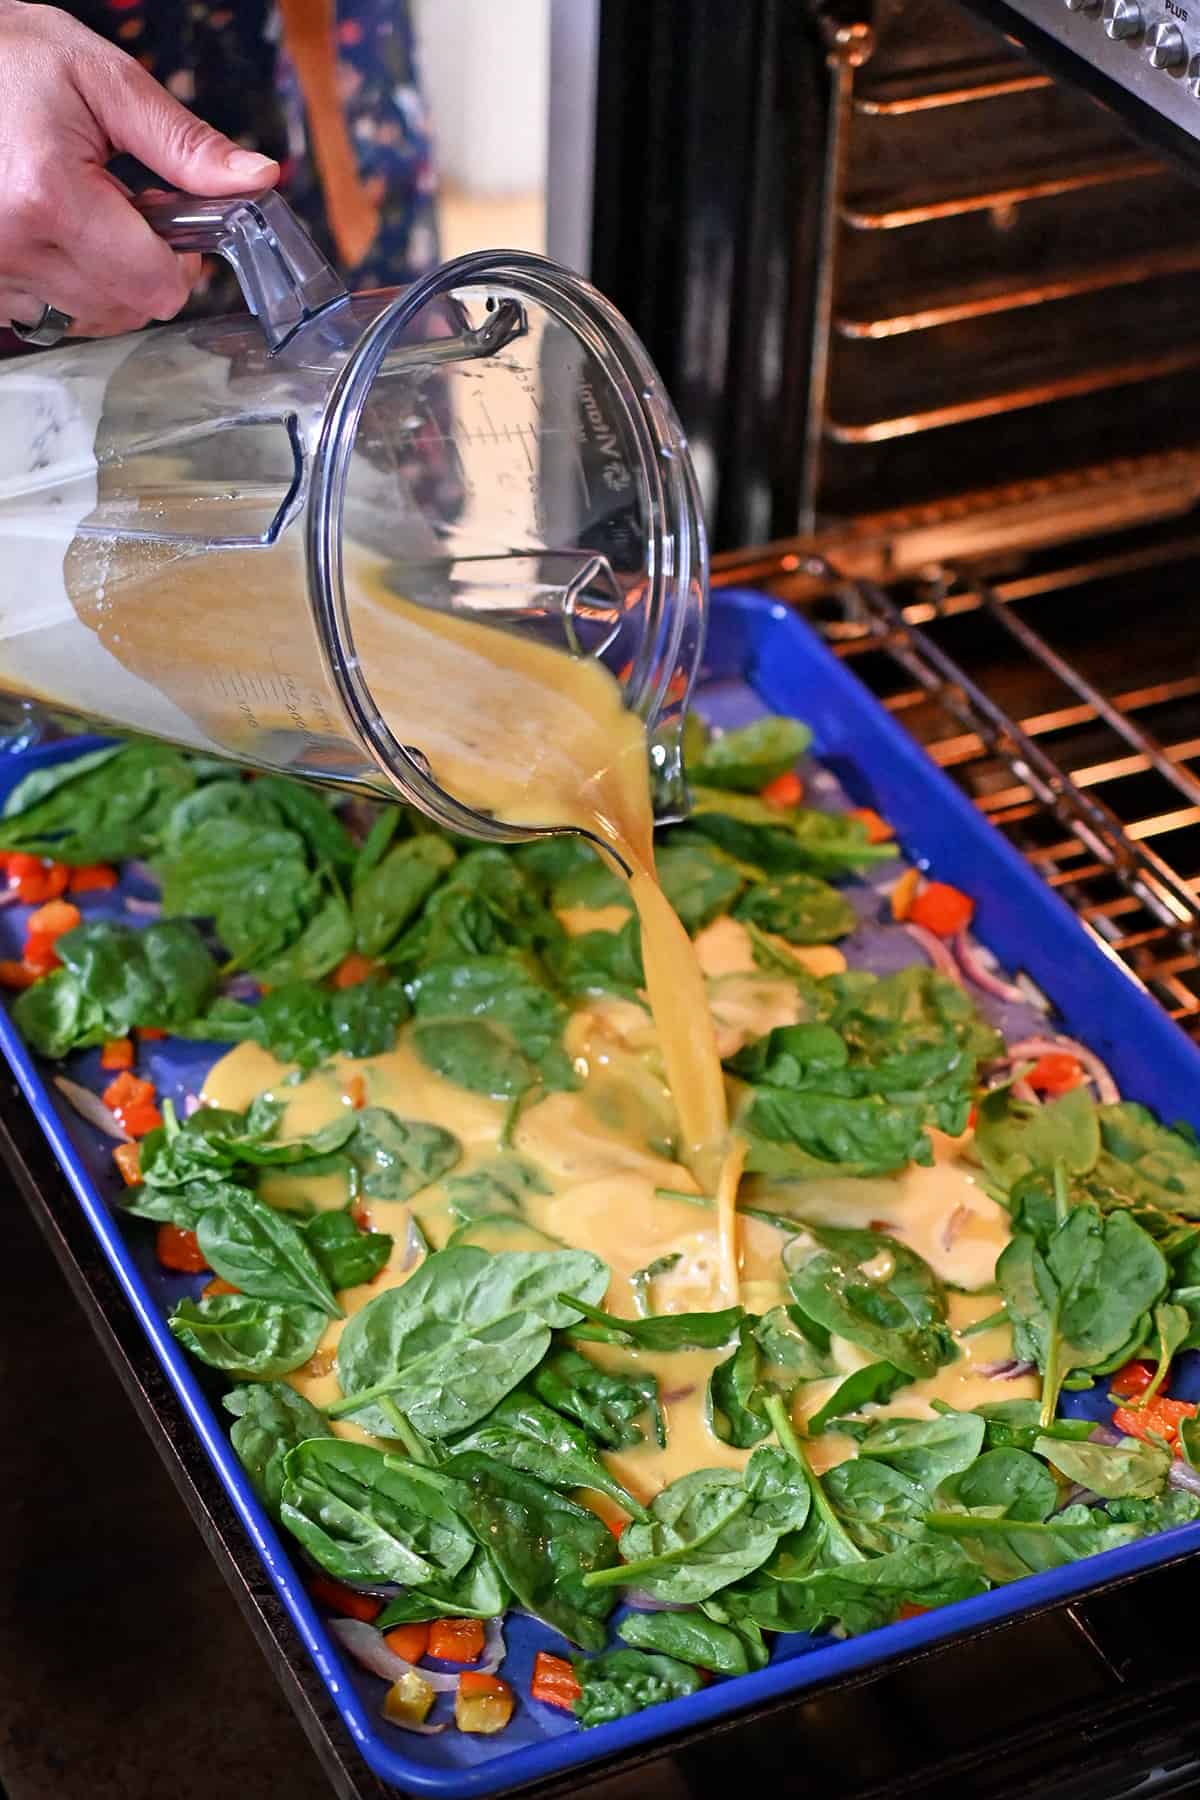 Pouring blended raw eggs from a Vitamix blender cup into a blue rimmed sheet pan filled with baby spinach, roasted sliced red onions, and roasted red bell peppers.